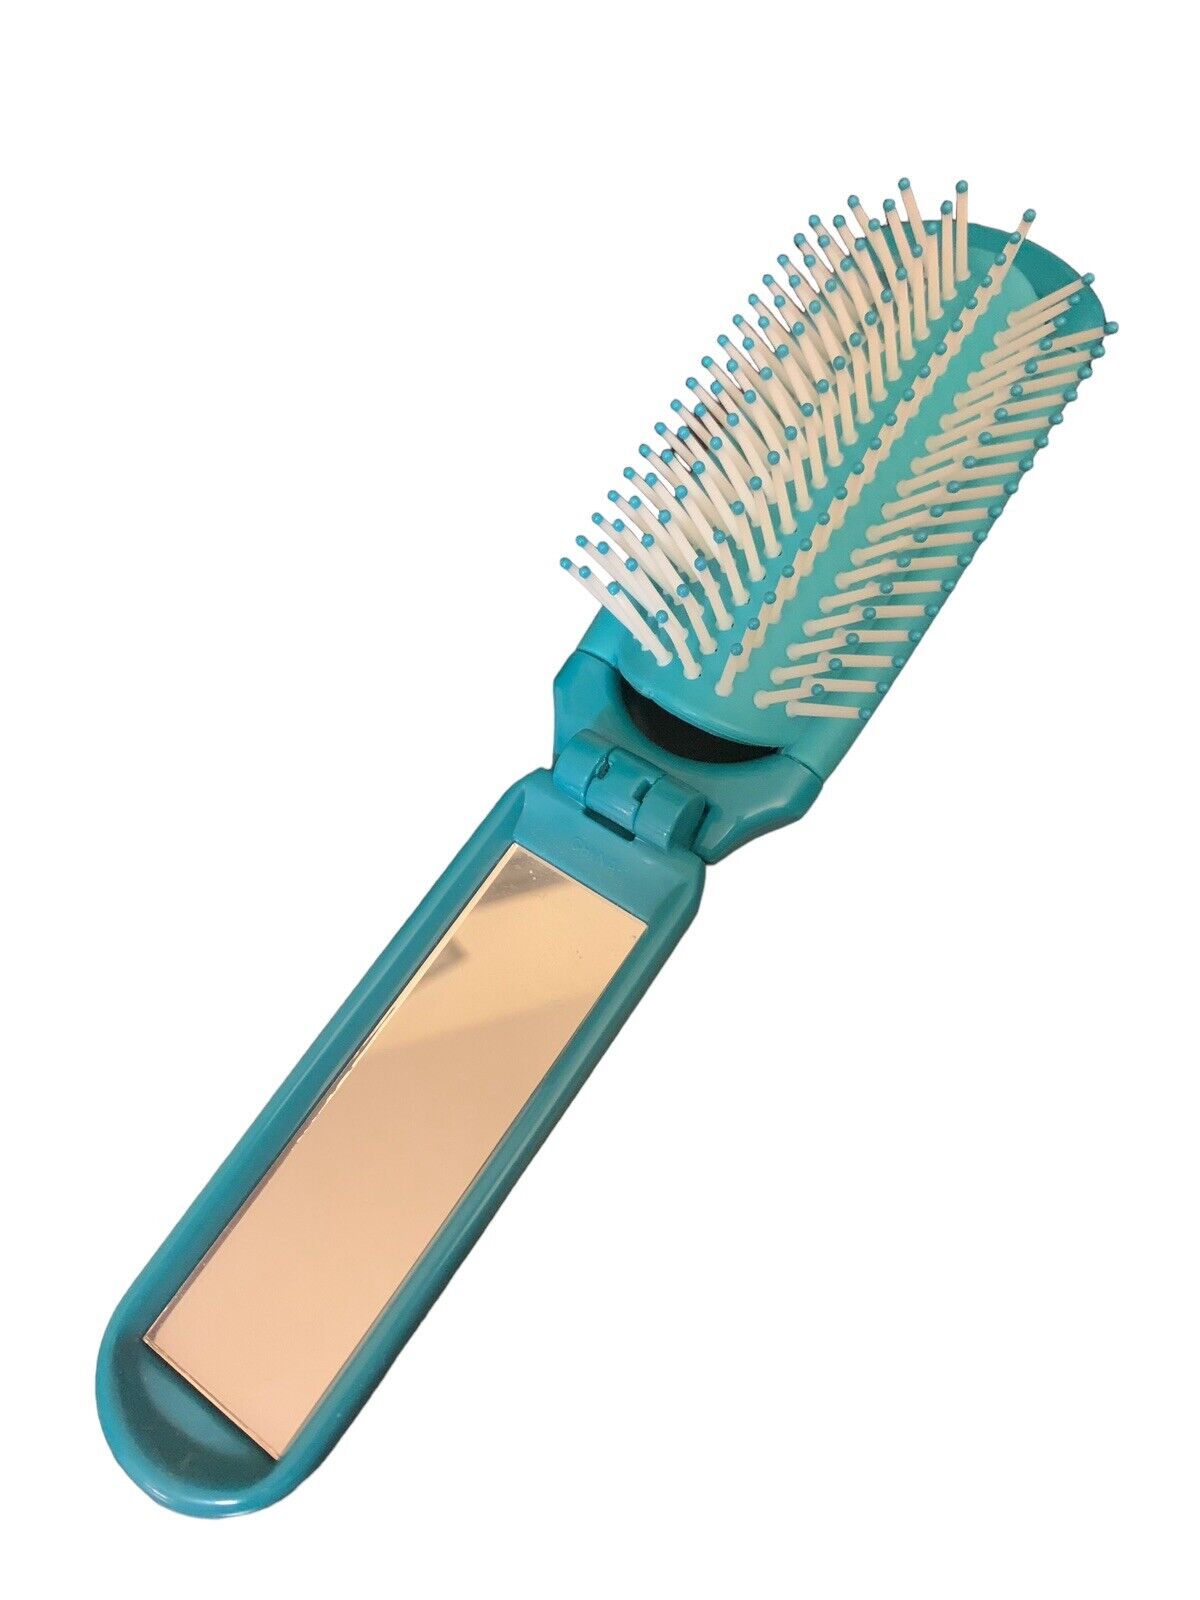 Clinique Teal Folding ~ Pop Up Hair Brush Mirror Compact Travel Hairbrush Pocket